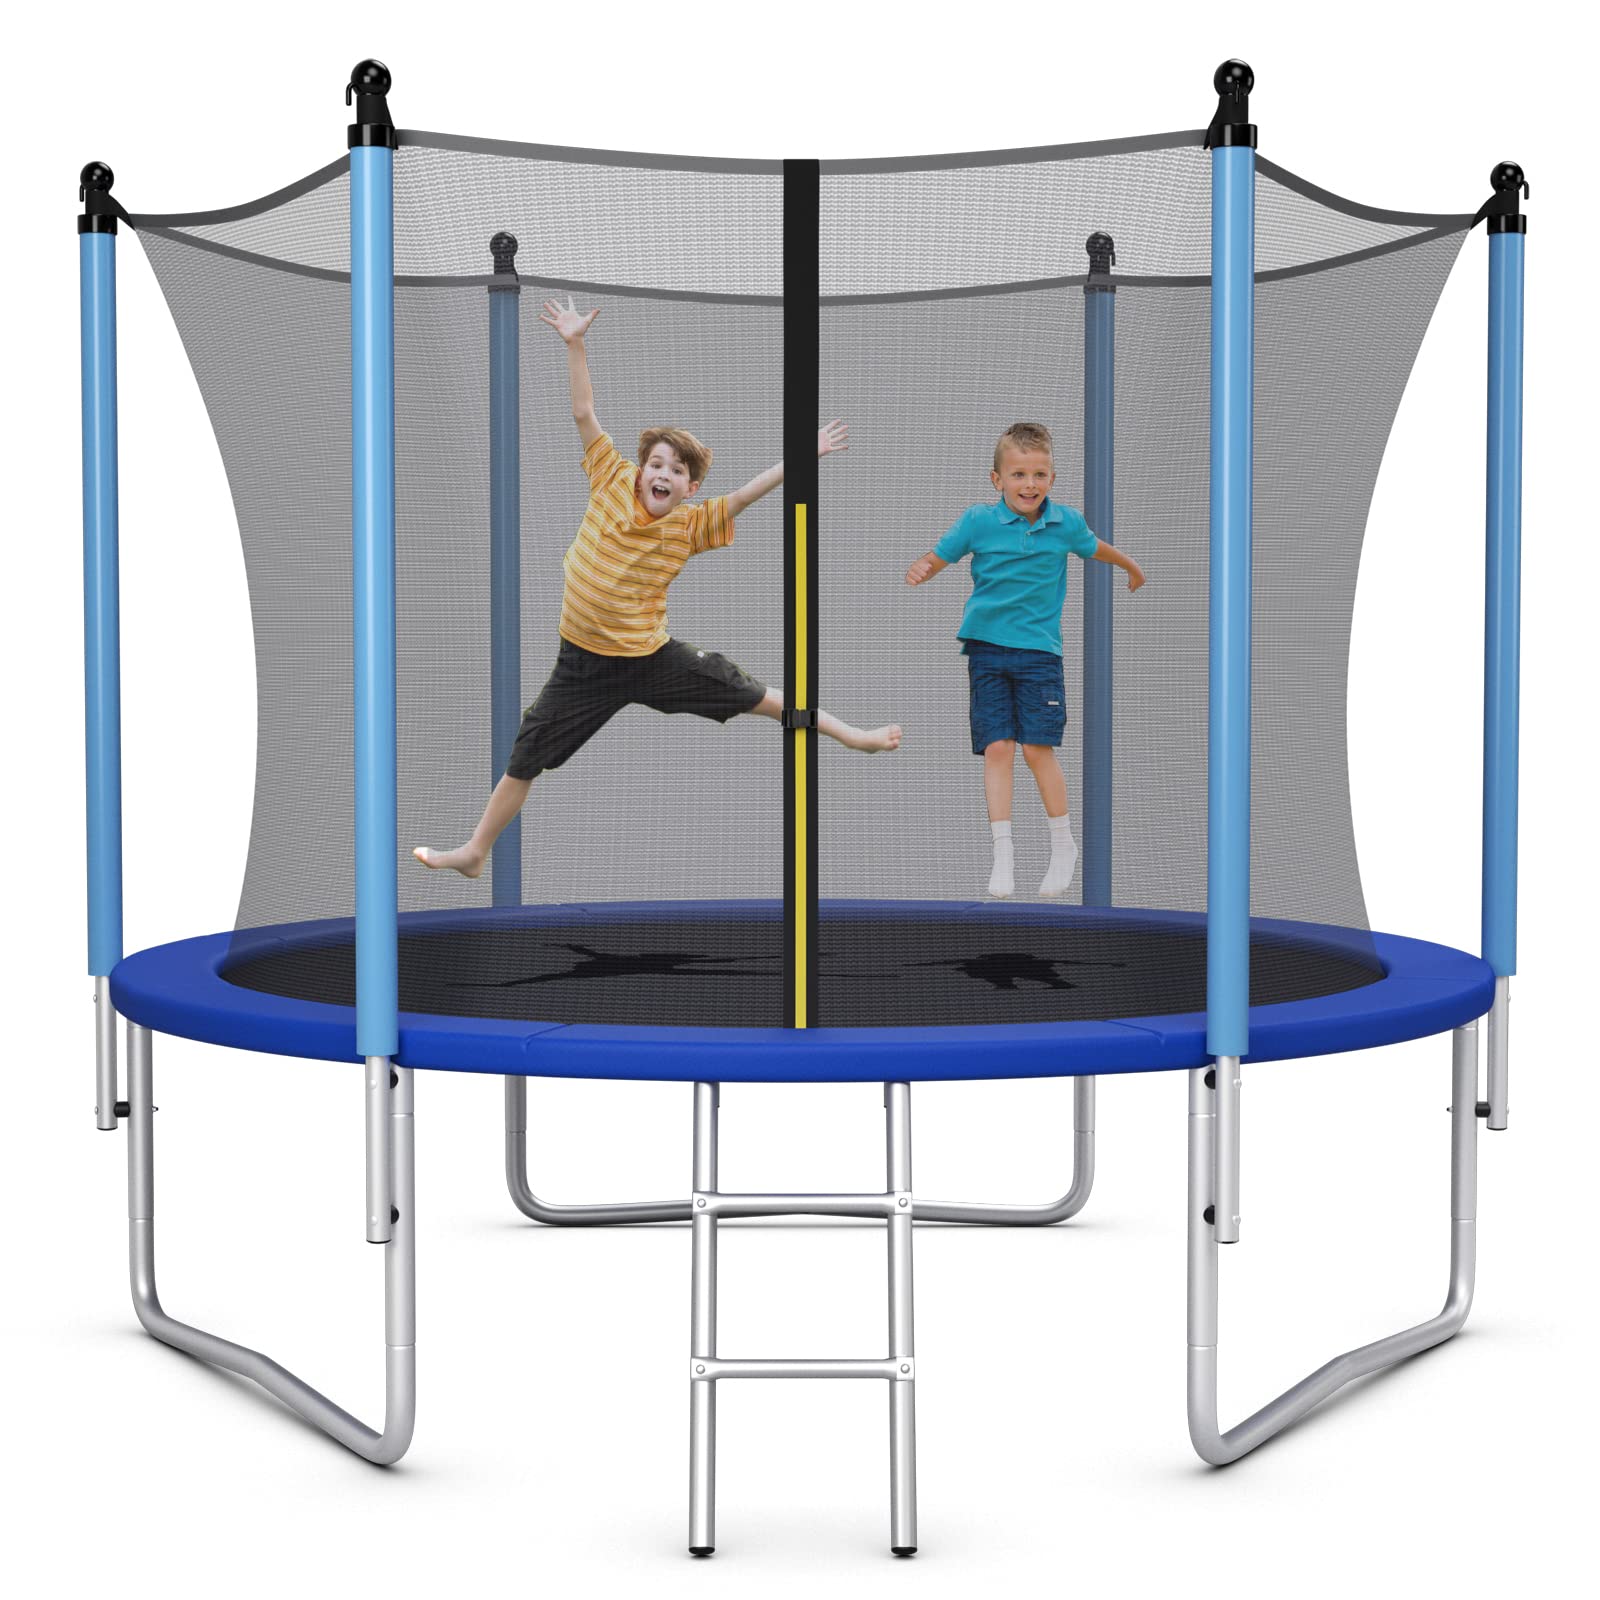 Giantex 8Ft 10Ft 12Ft 14Ft 15Ft 16Ft ASTM Certified Approved Recreational Trampolines